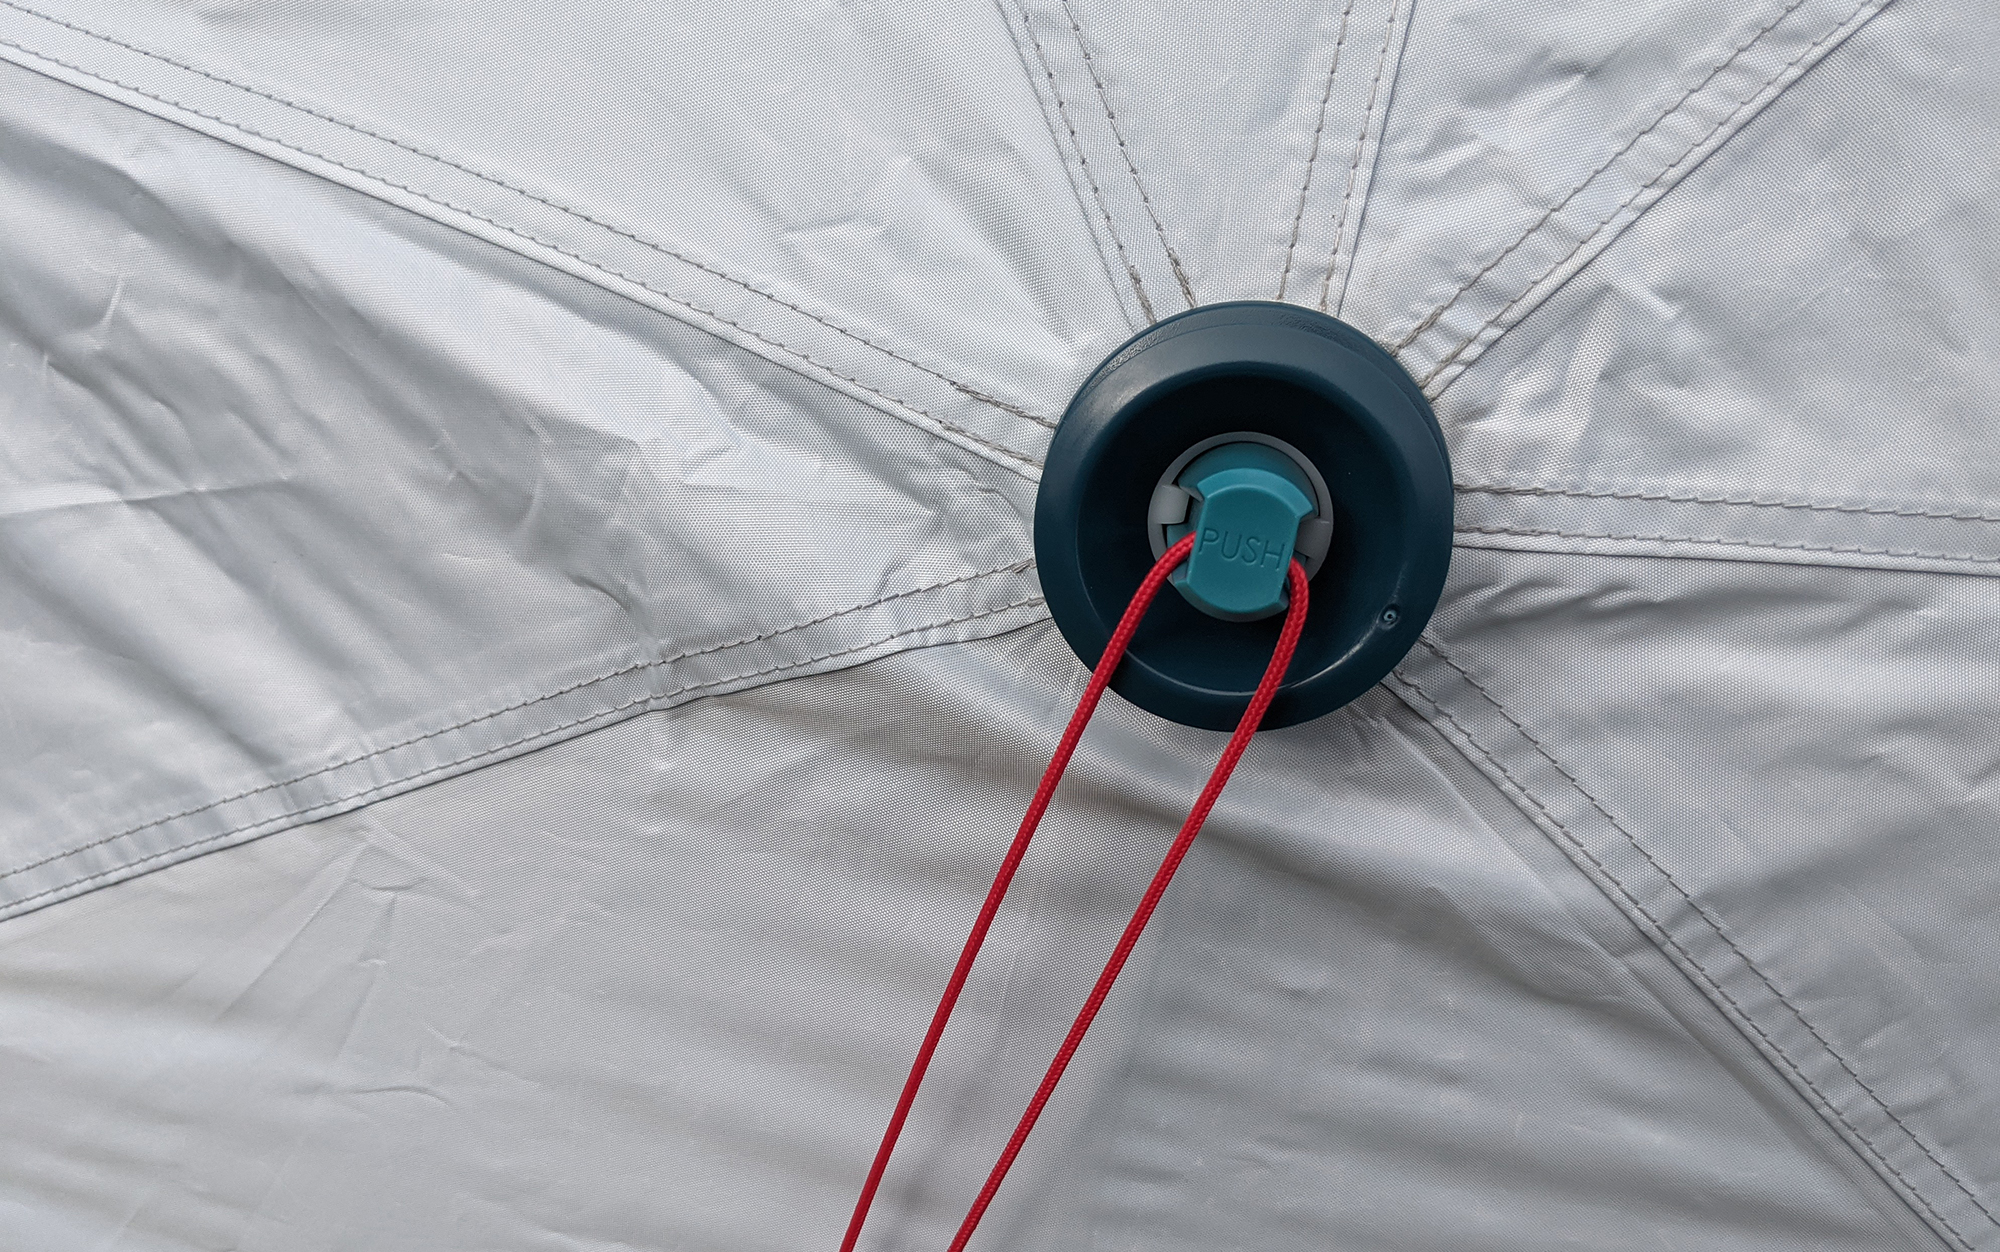 Pressing firmly on the blue button collapses the tent instantly, making for a surprisingly short tear-down time.